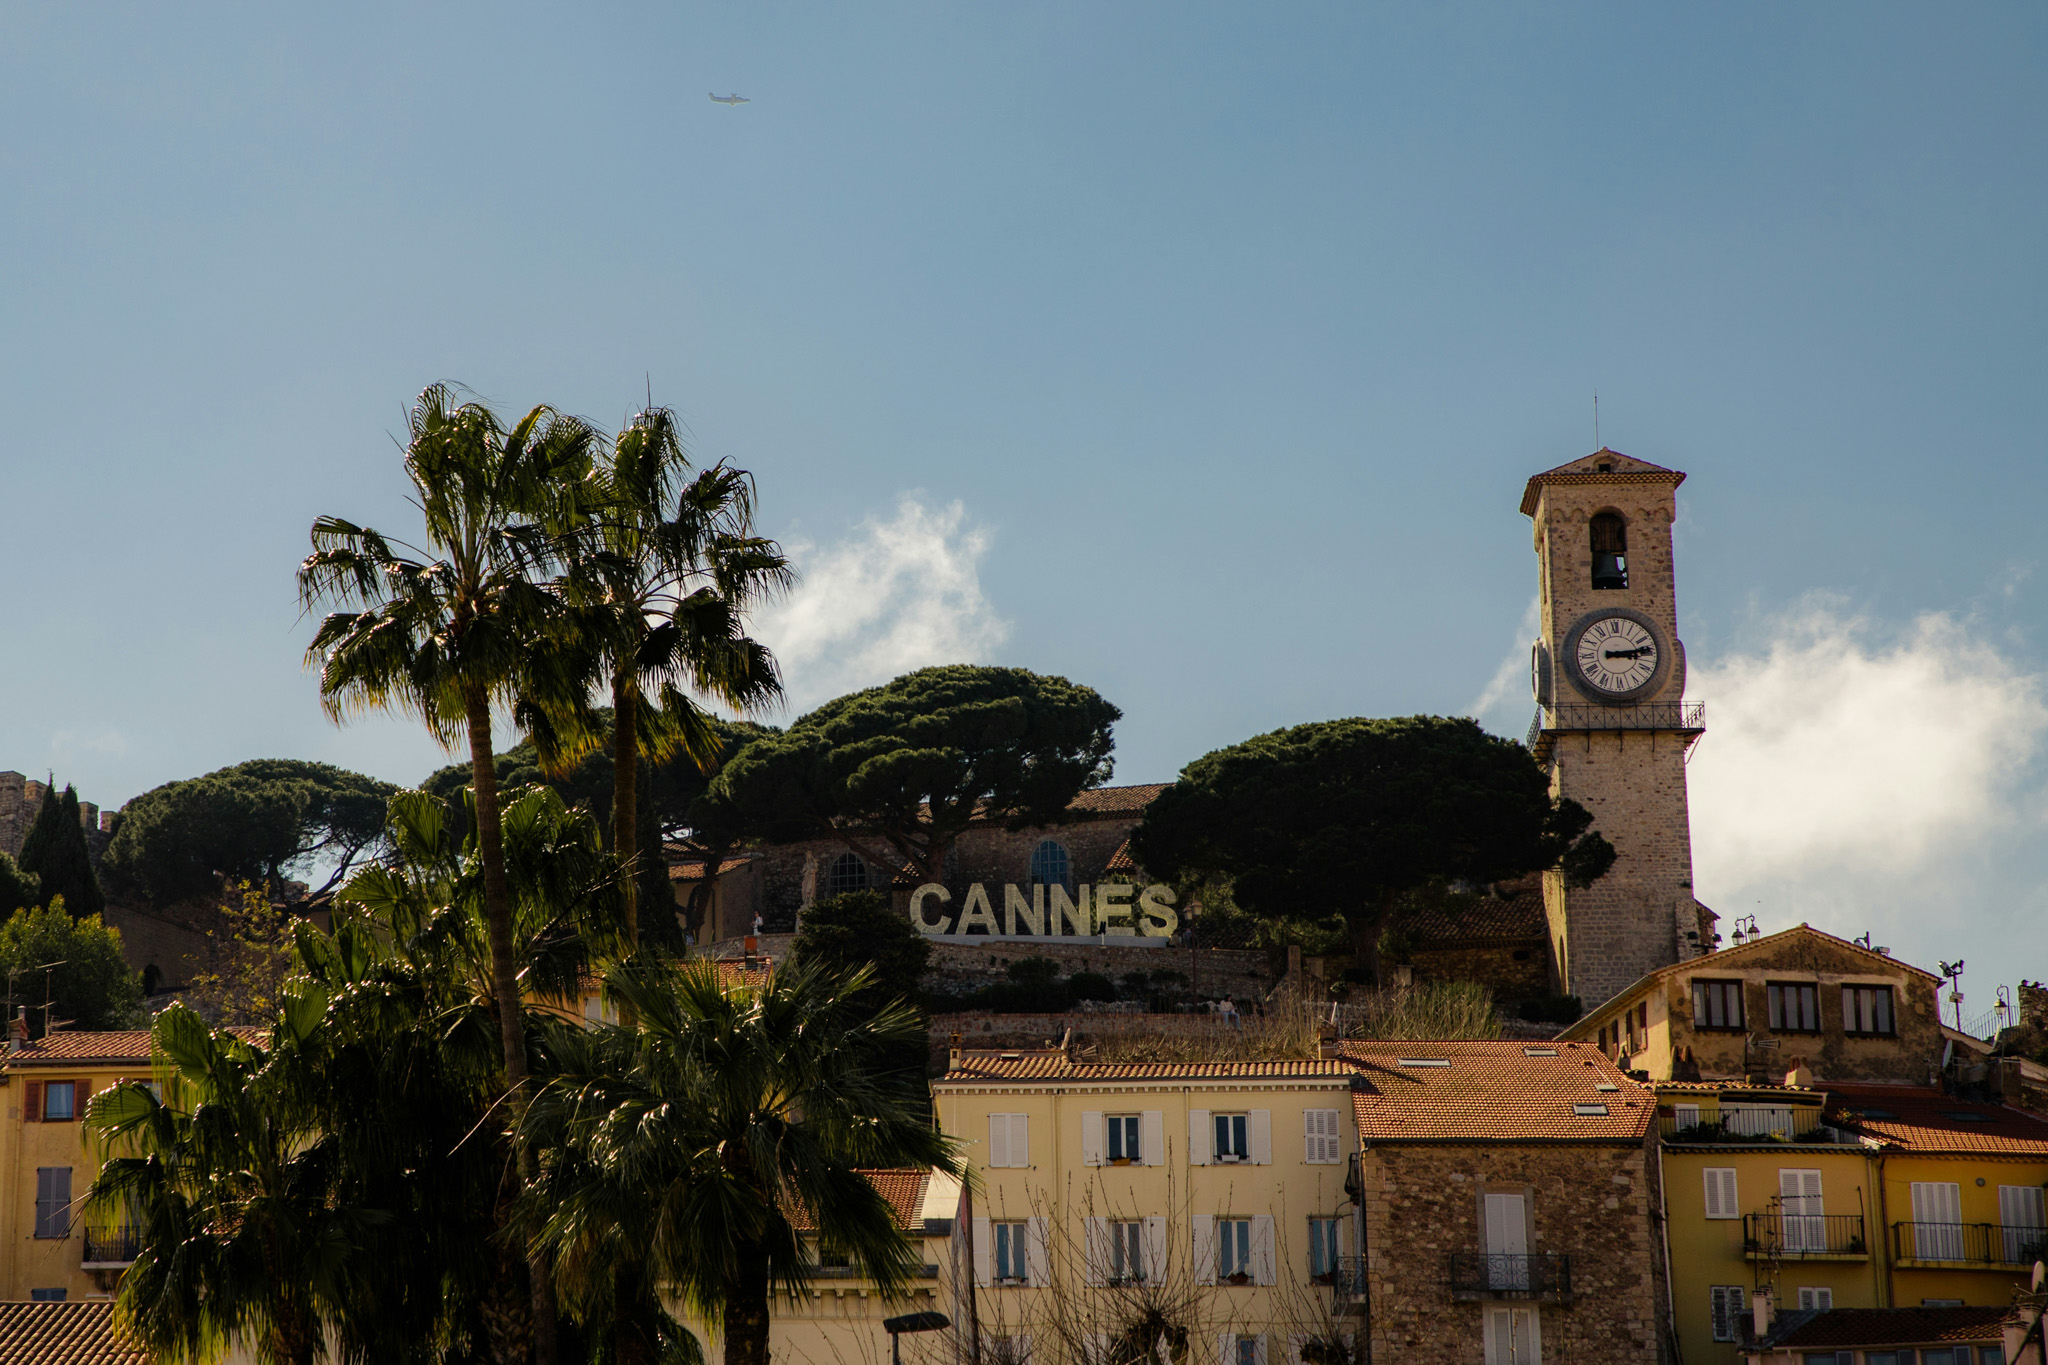 Cannes sign by French Clock Tower